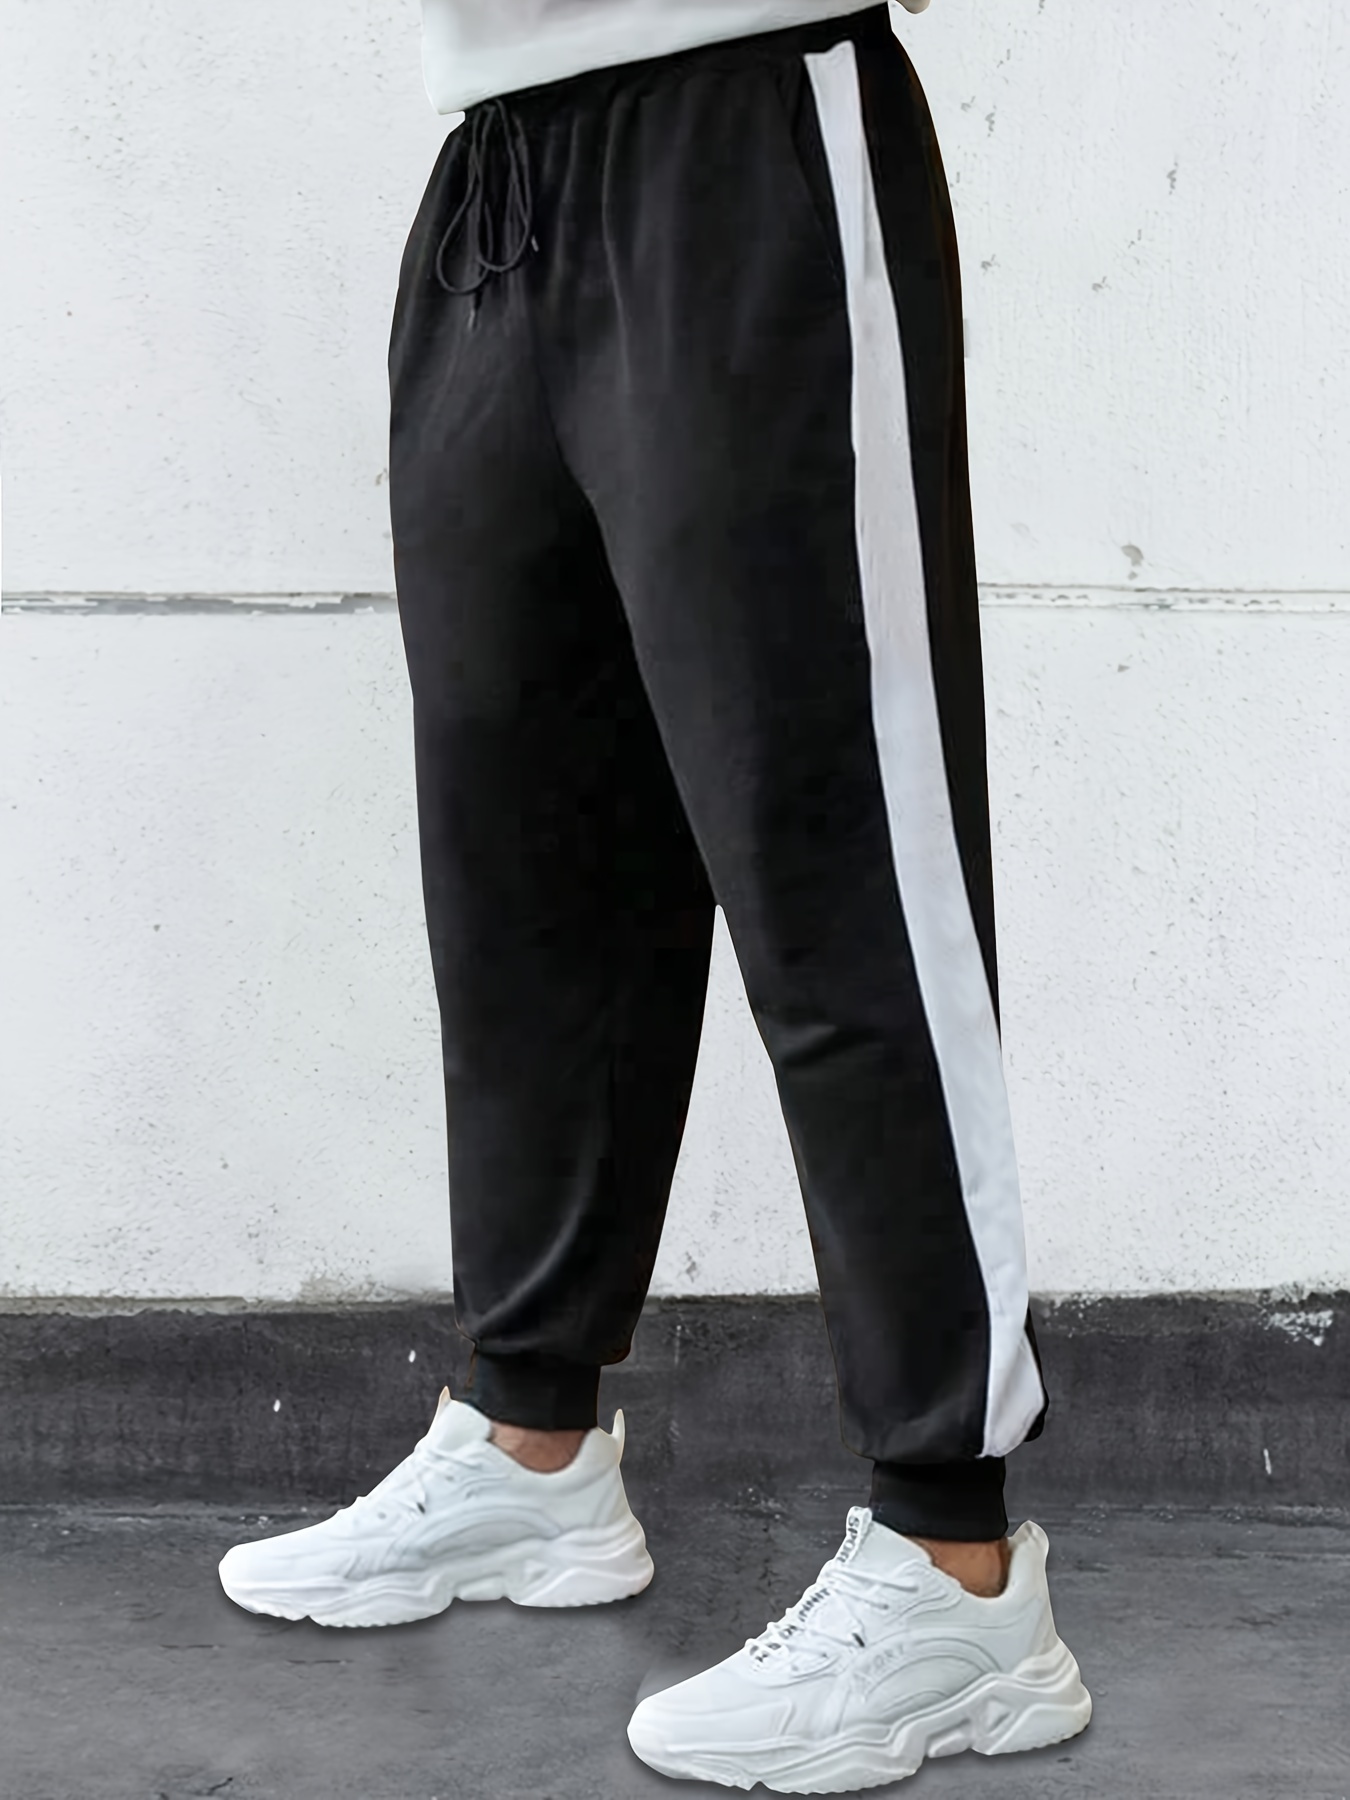 Yummy Material Jogger Pants Black with White Stripes - Its All